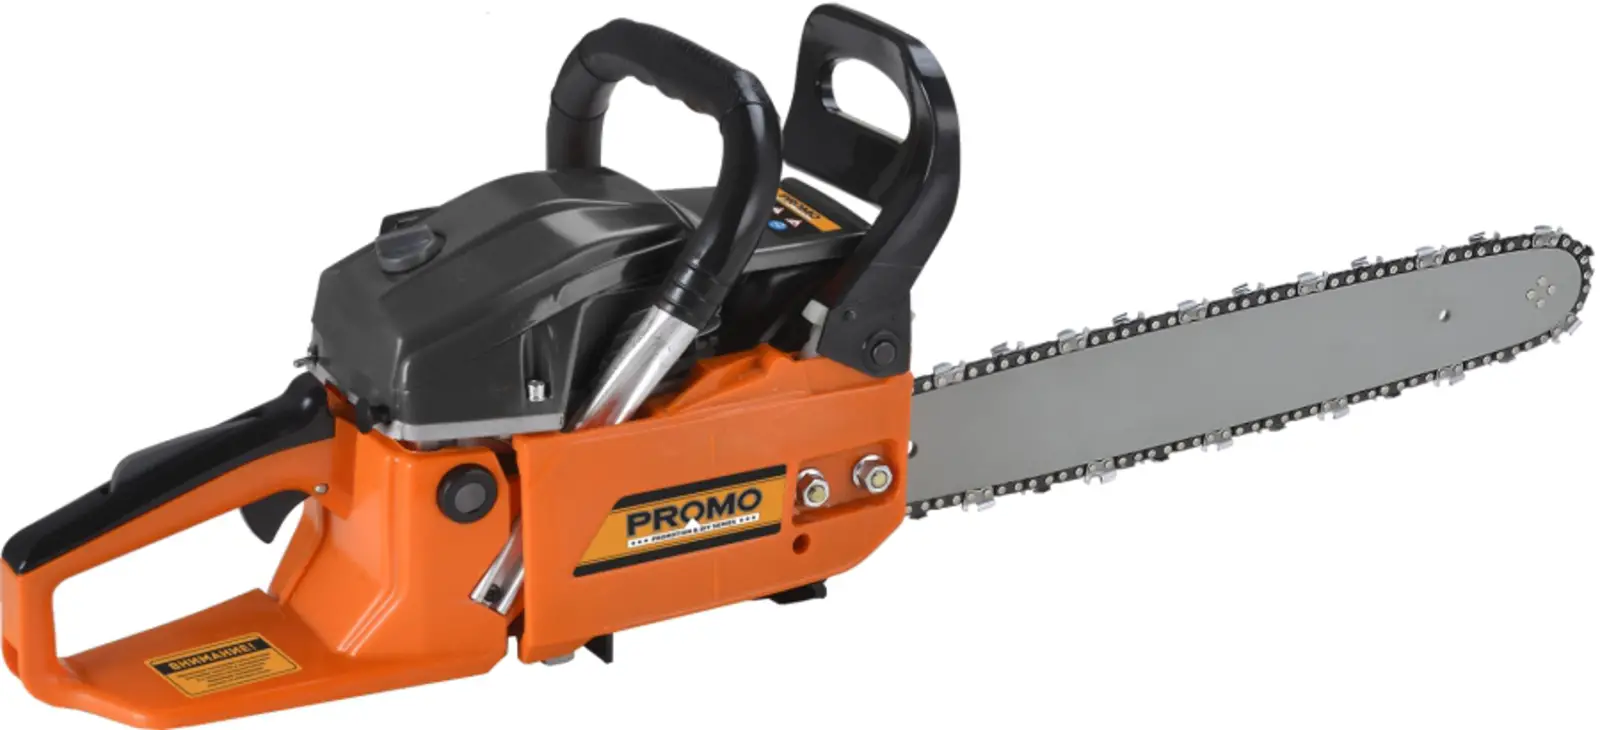 Carver brand chainsaw: description, specifications and reviews of owners